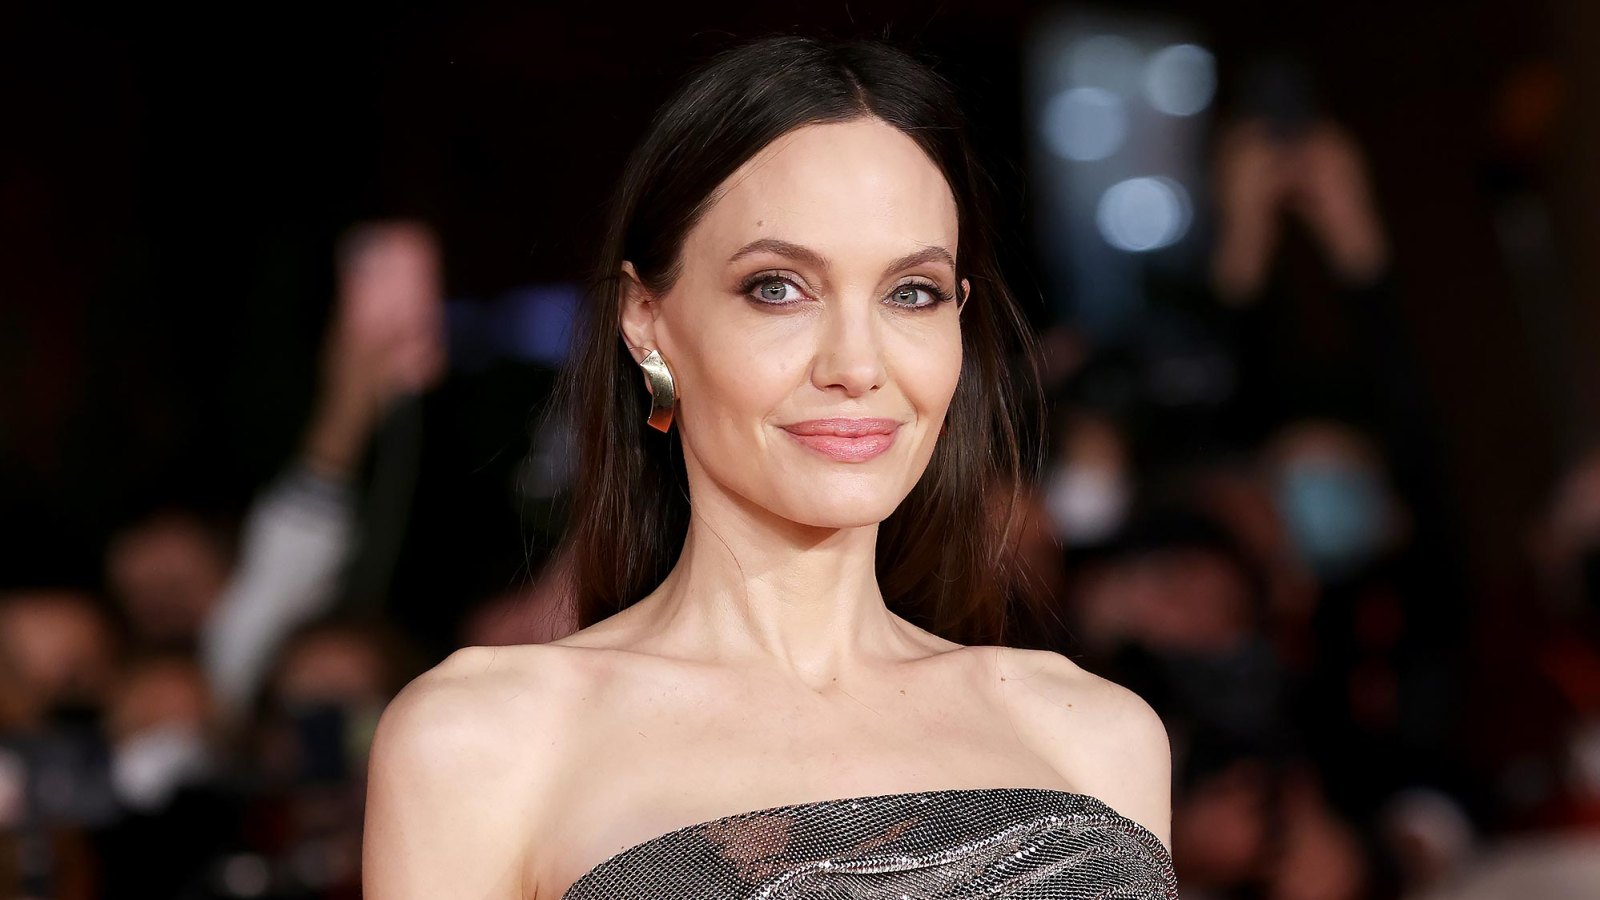 Angelina Jolie Says She Doesn't ‘Have a Social Life’ in Los Angeles, Calls Hollywood ‘Shallow’